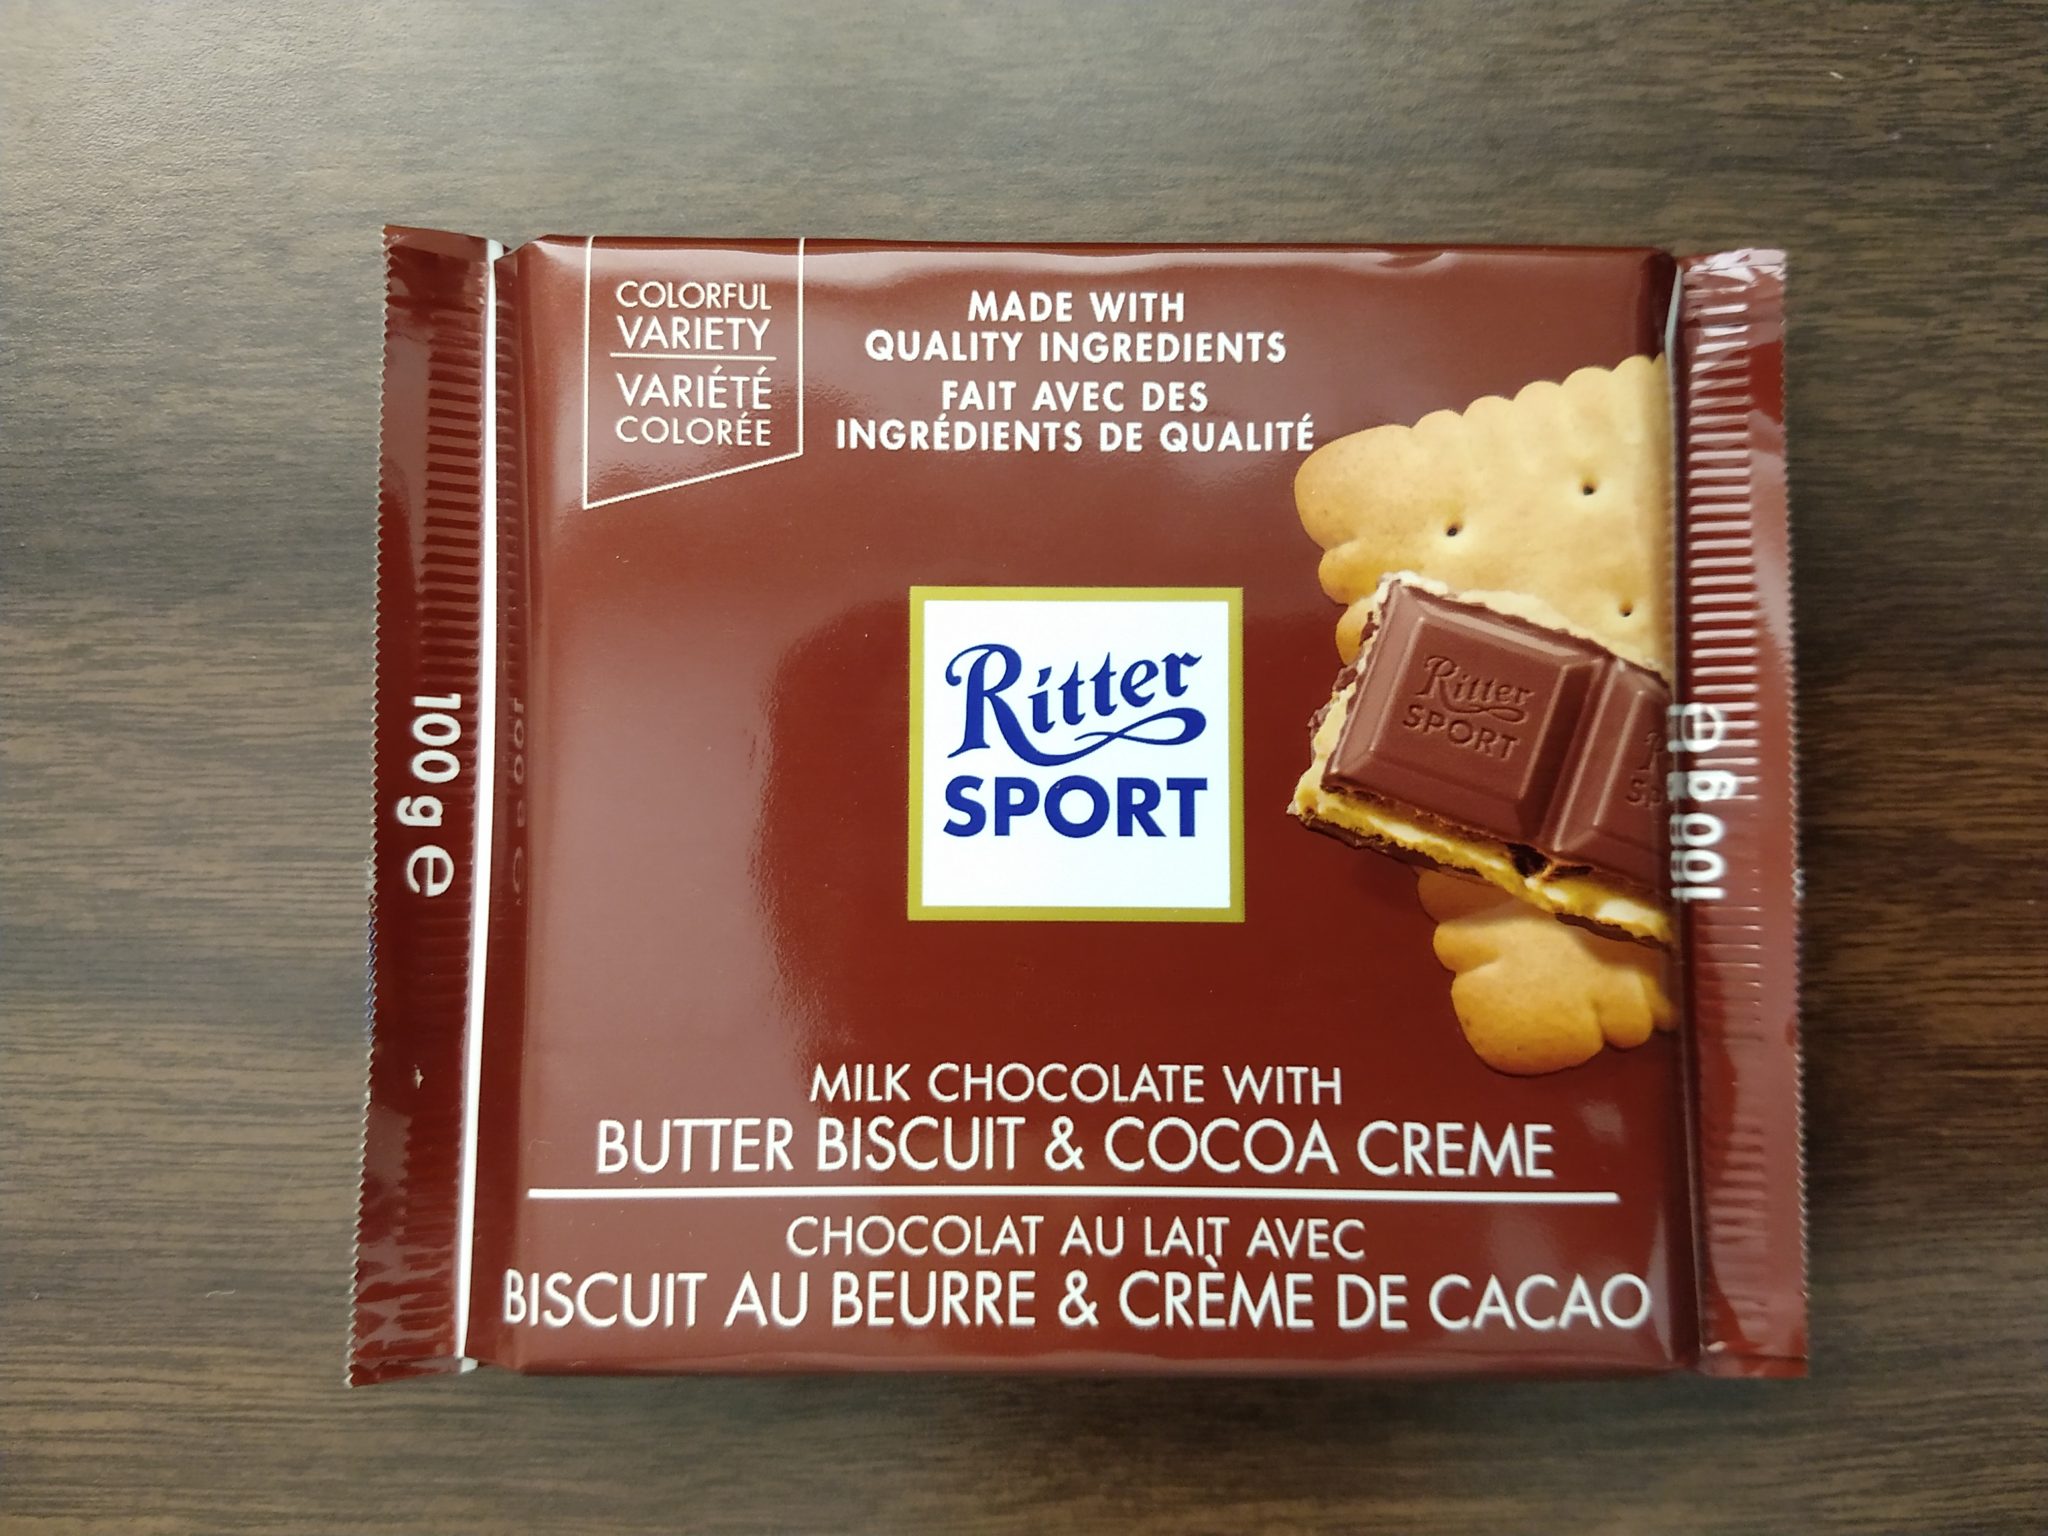 Ritter Sport – Milk Chocolate with Butter Biscuit